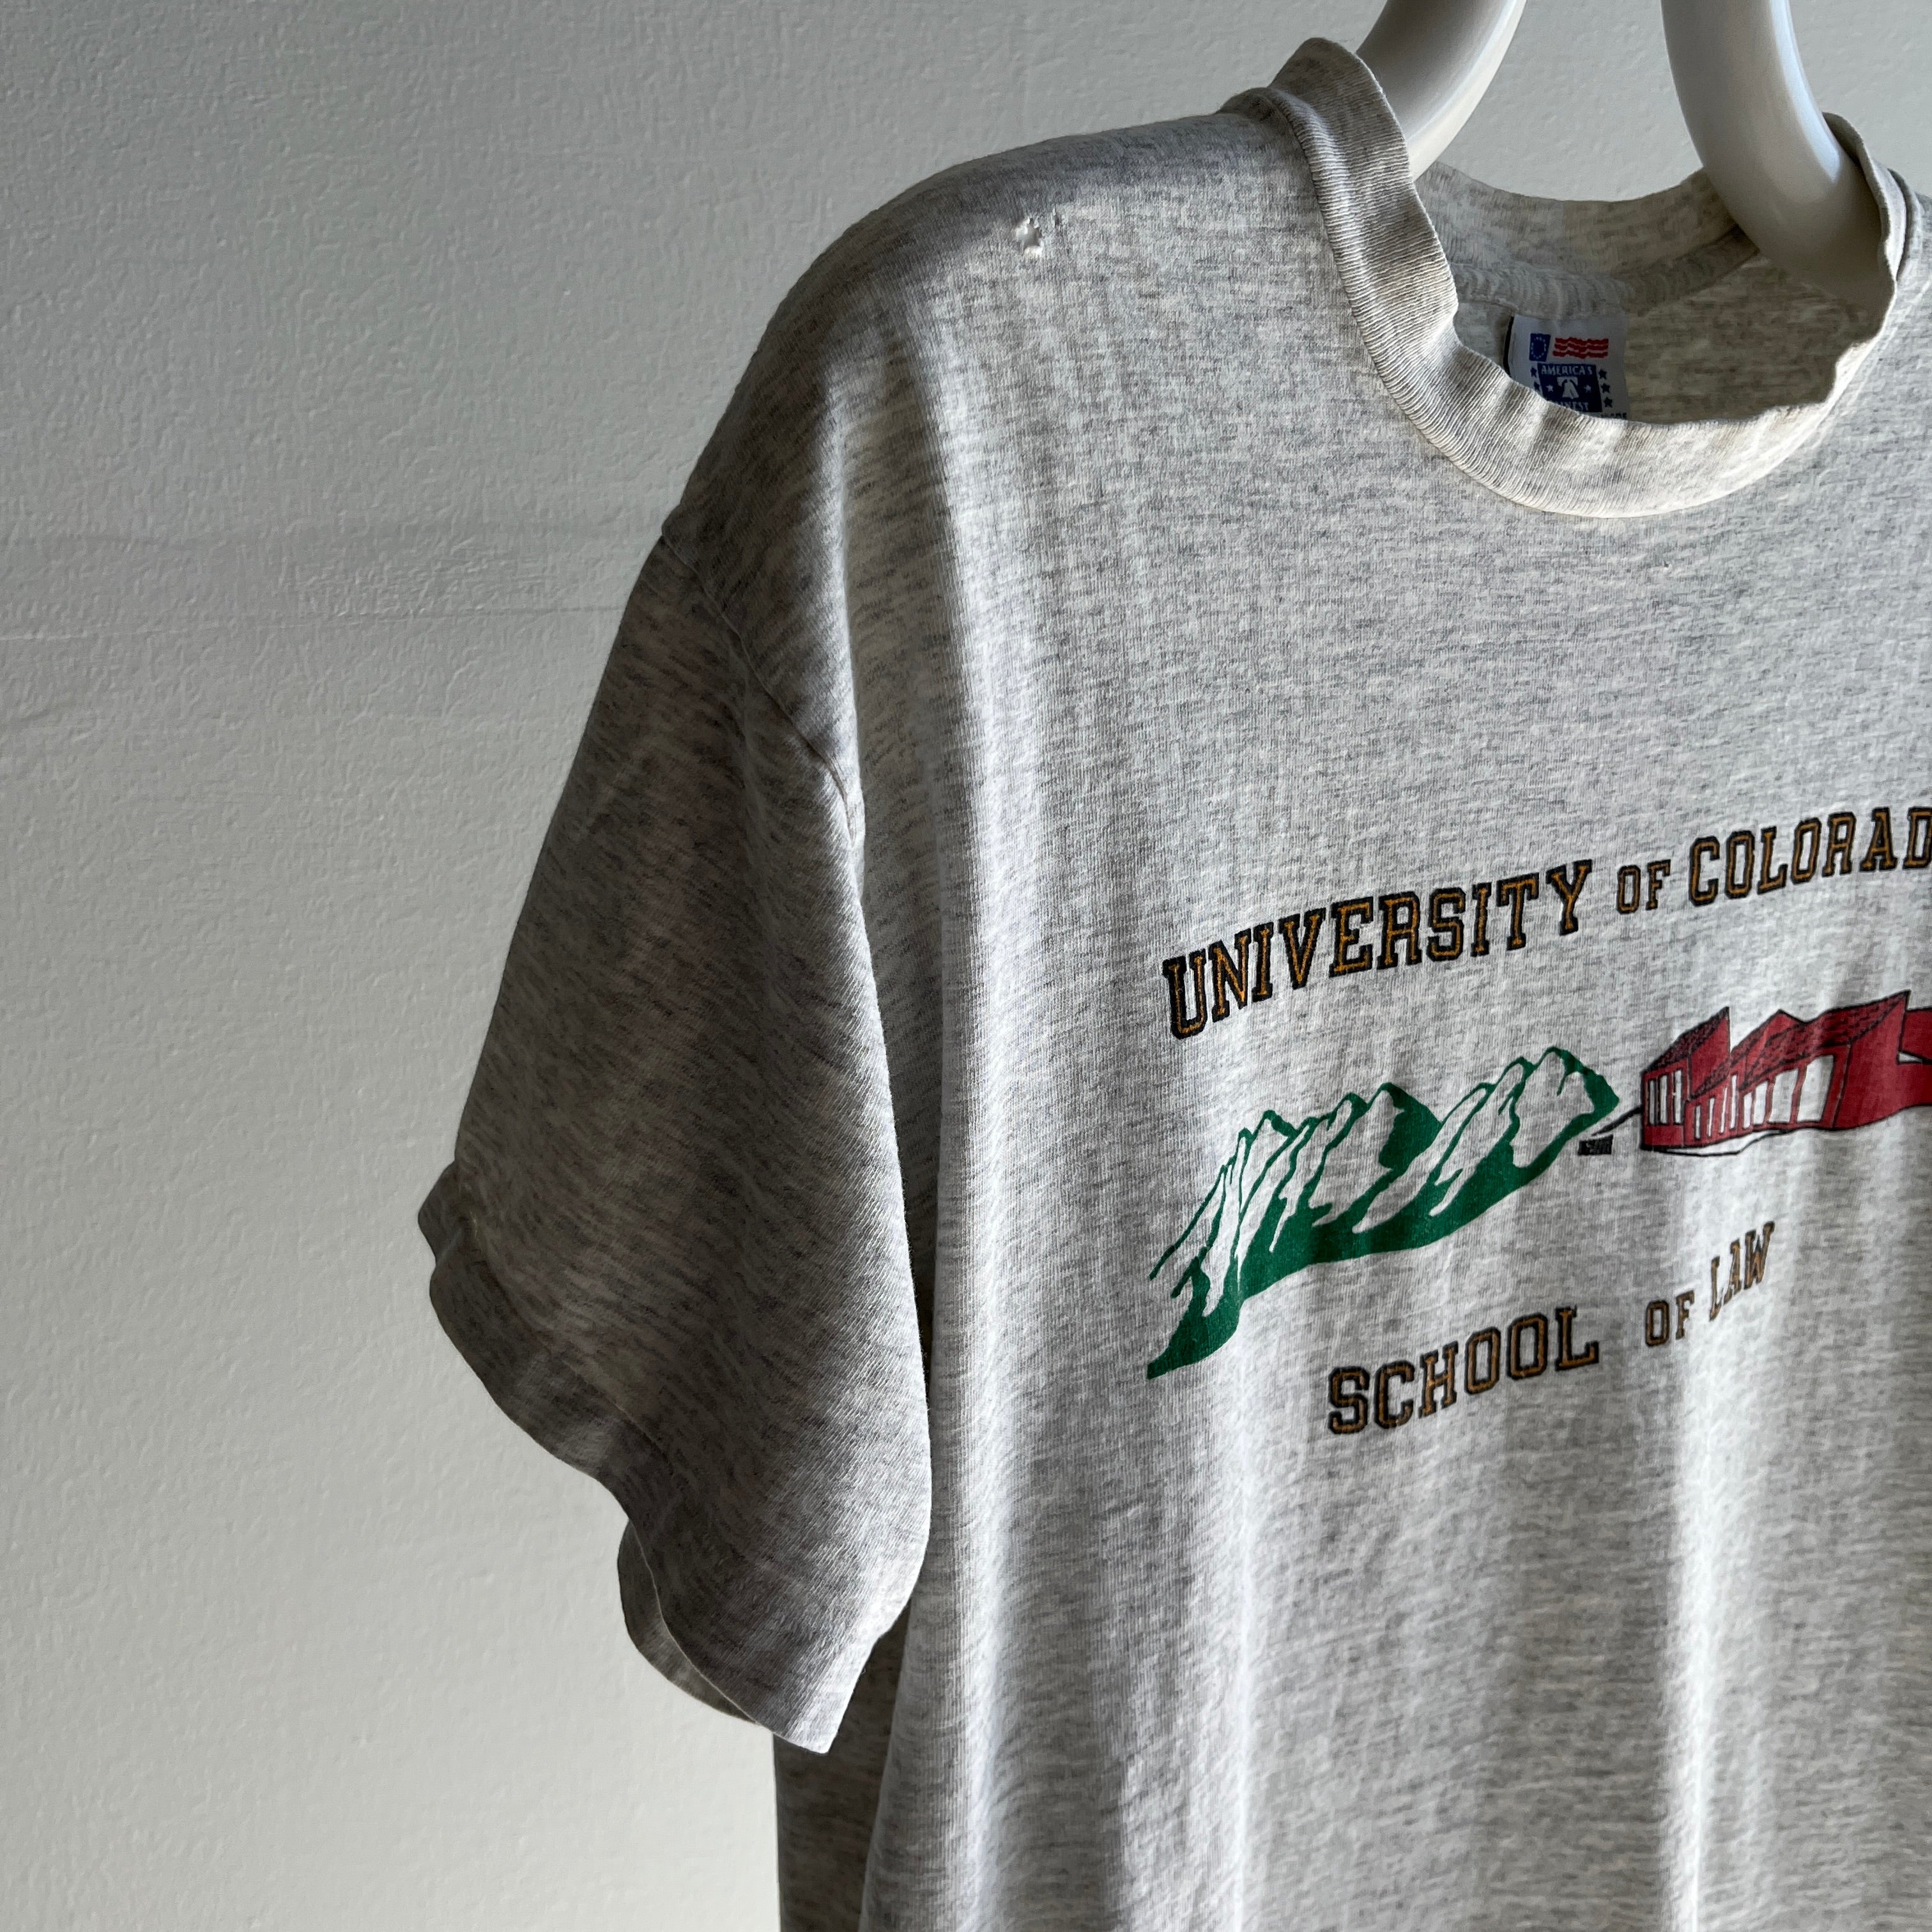 1980s Thinned Out Tattered and Torn University of Colorado T-Shirt